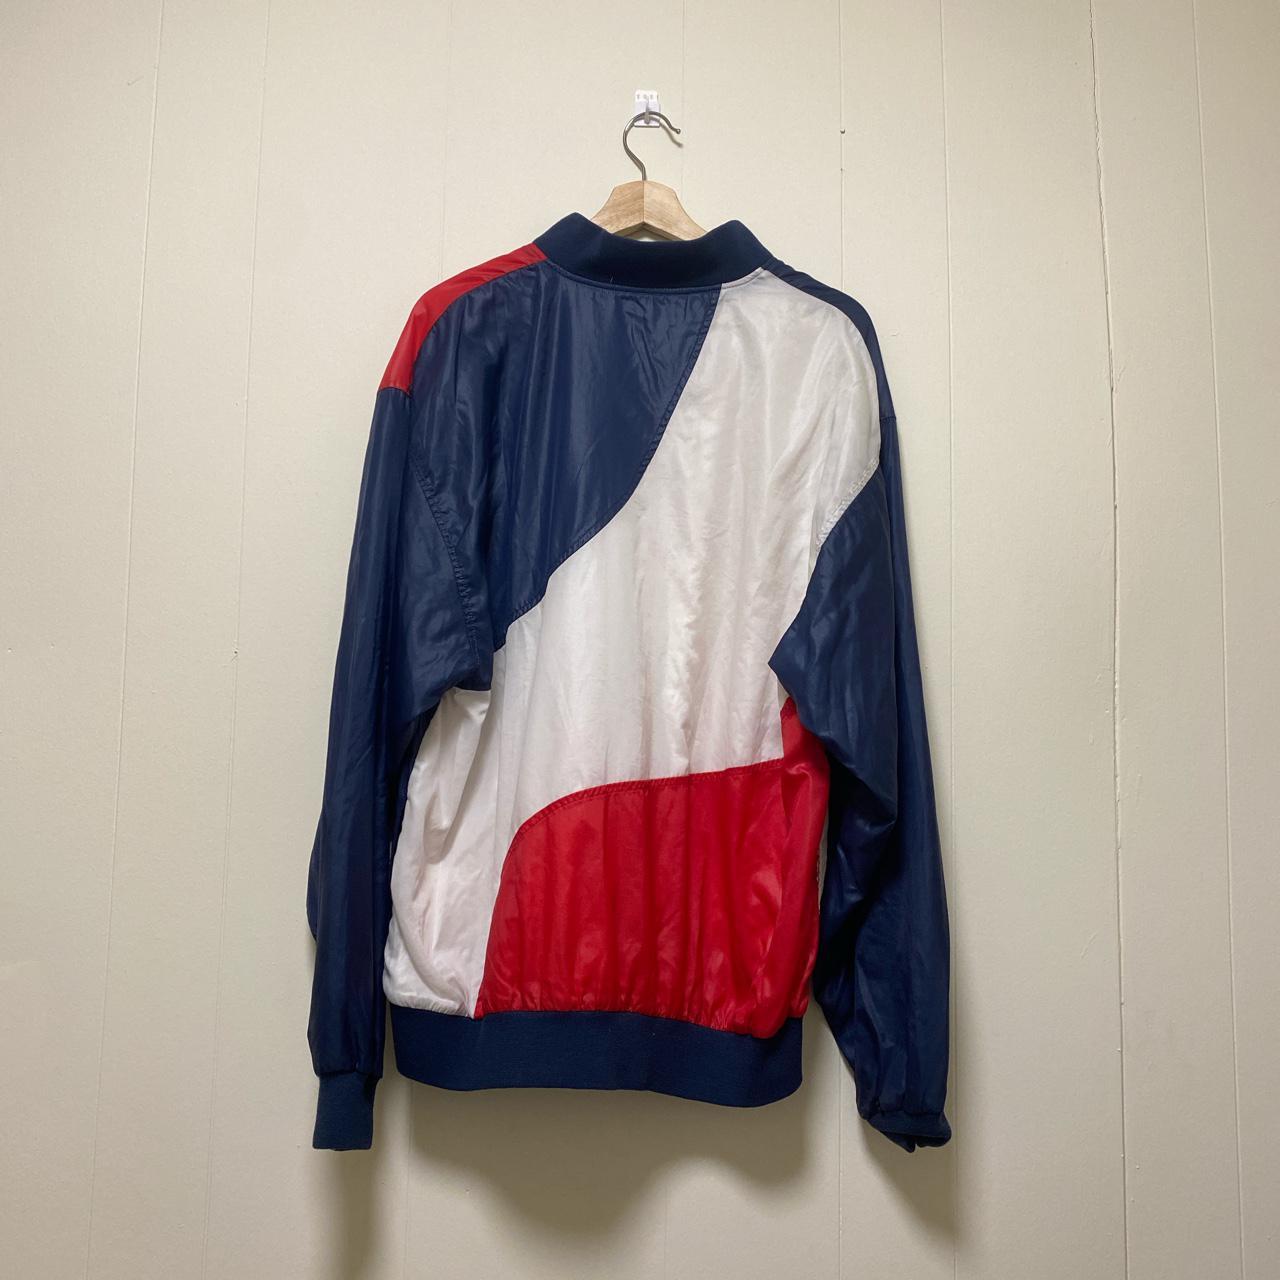 Prince Men's Blue and Red Jacket (2)